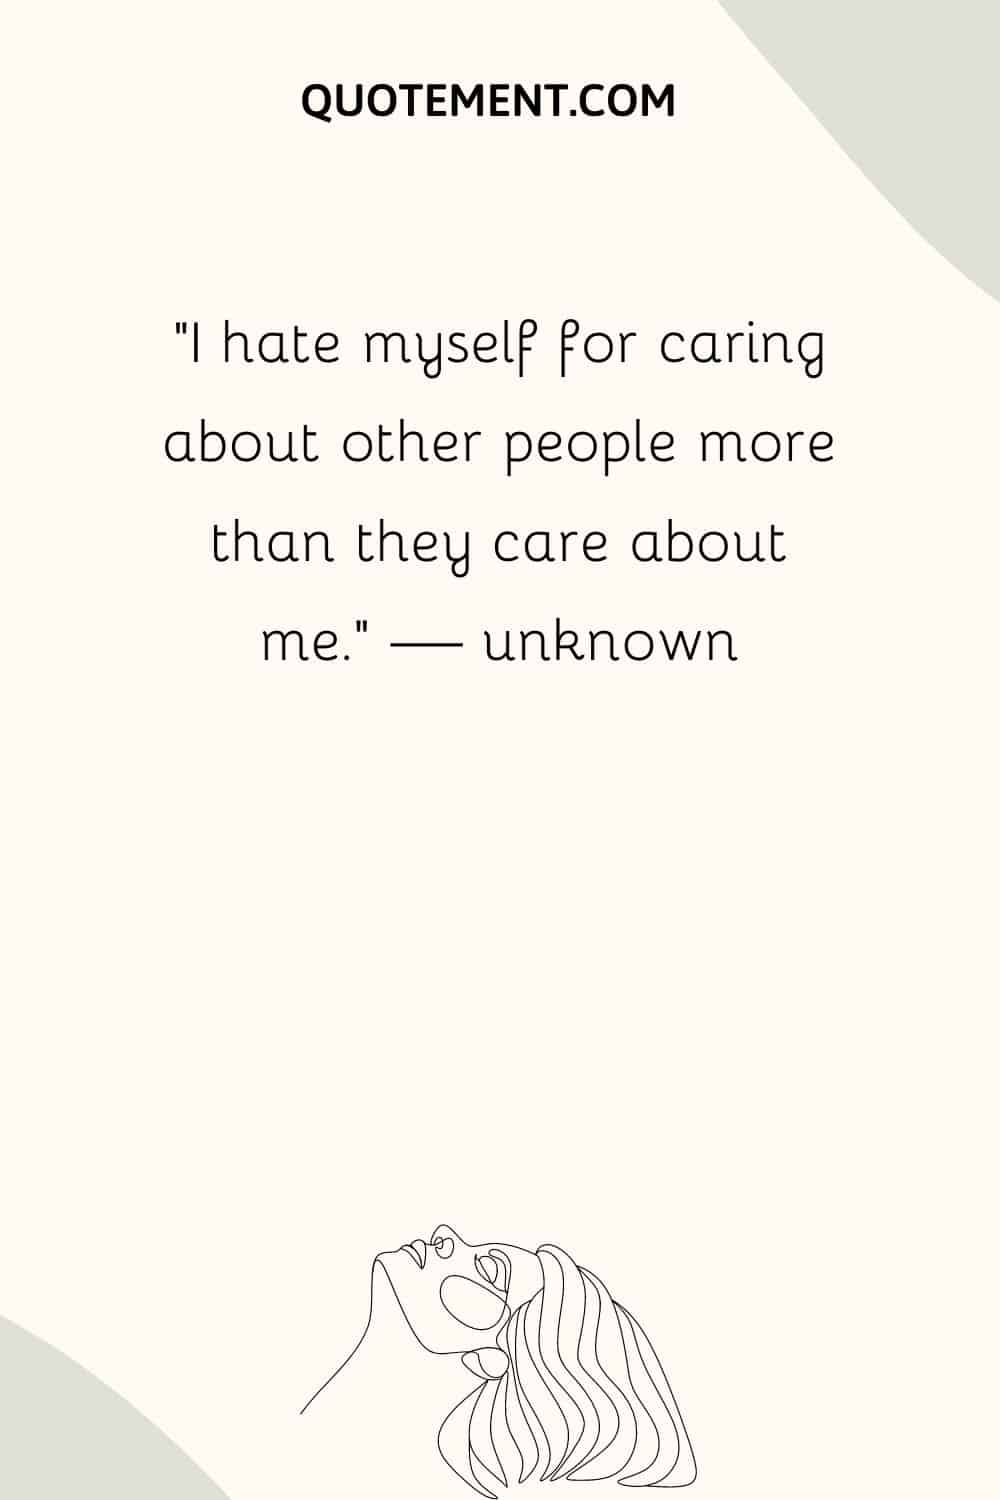 I hate myself for caring about other people more than they care about me